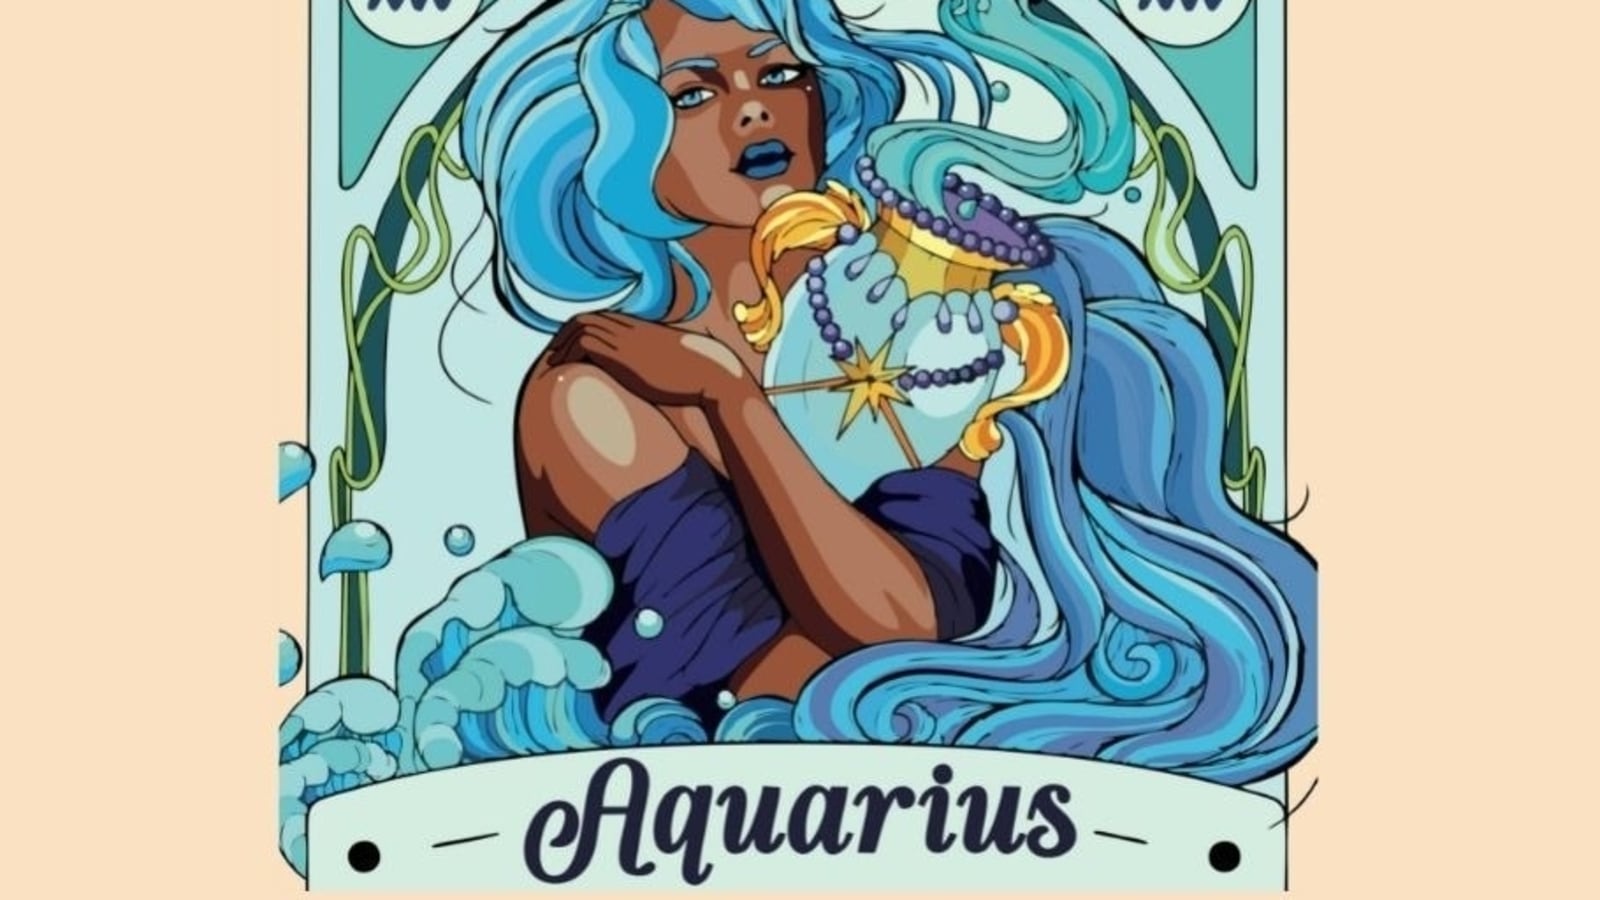 aquarius-daily-horoscope-for-august-21-2022-a-day-full-of-inspiration